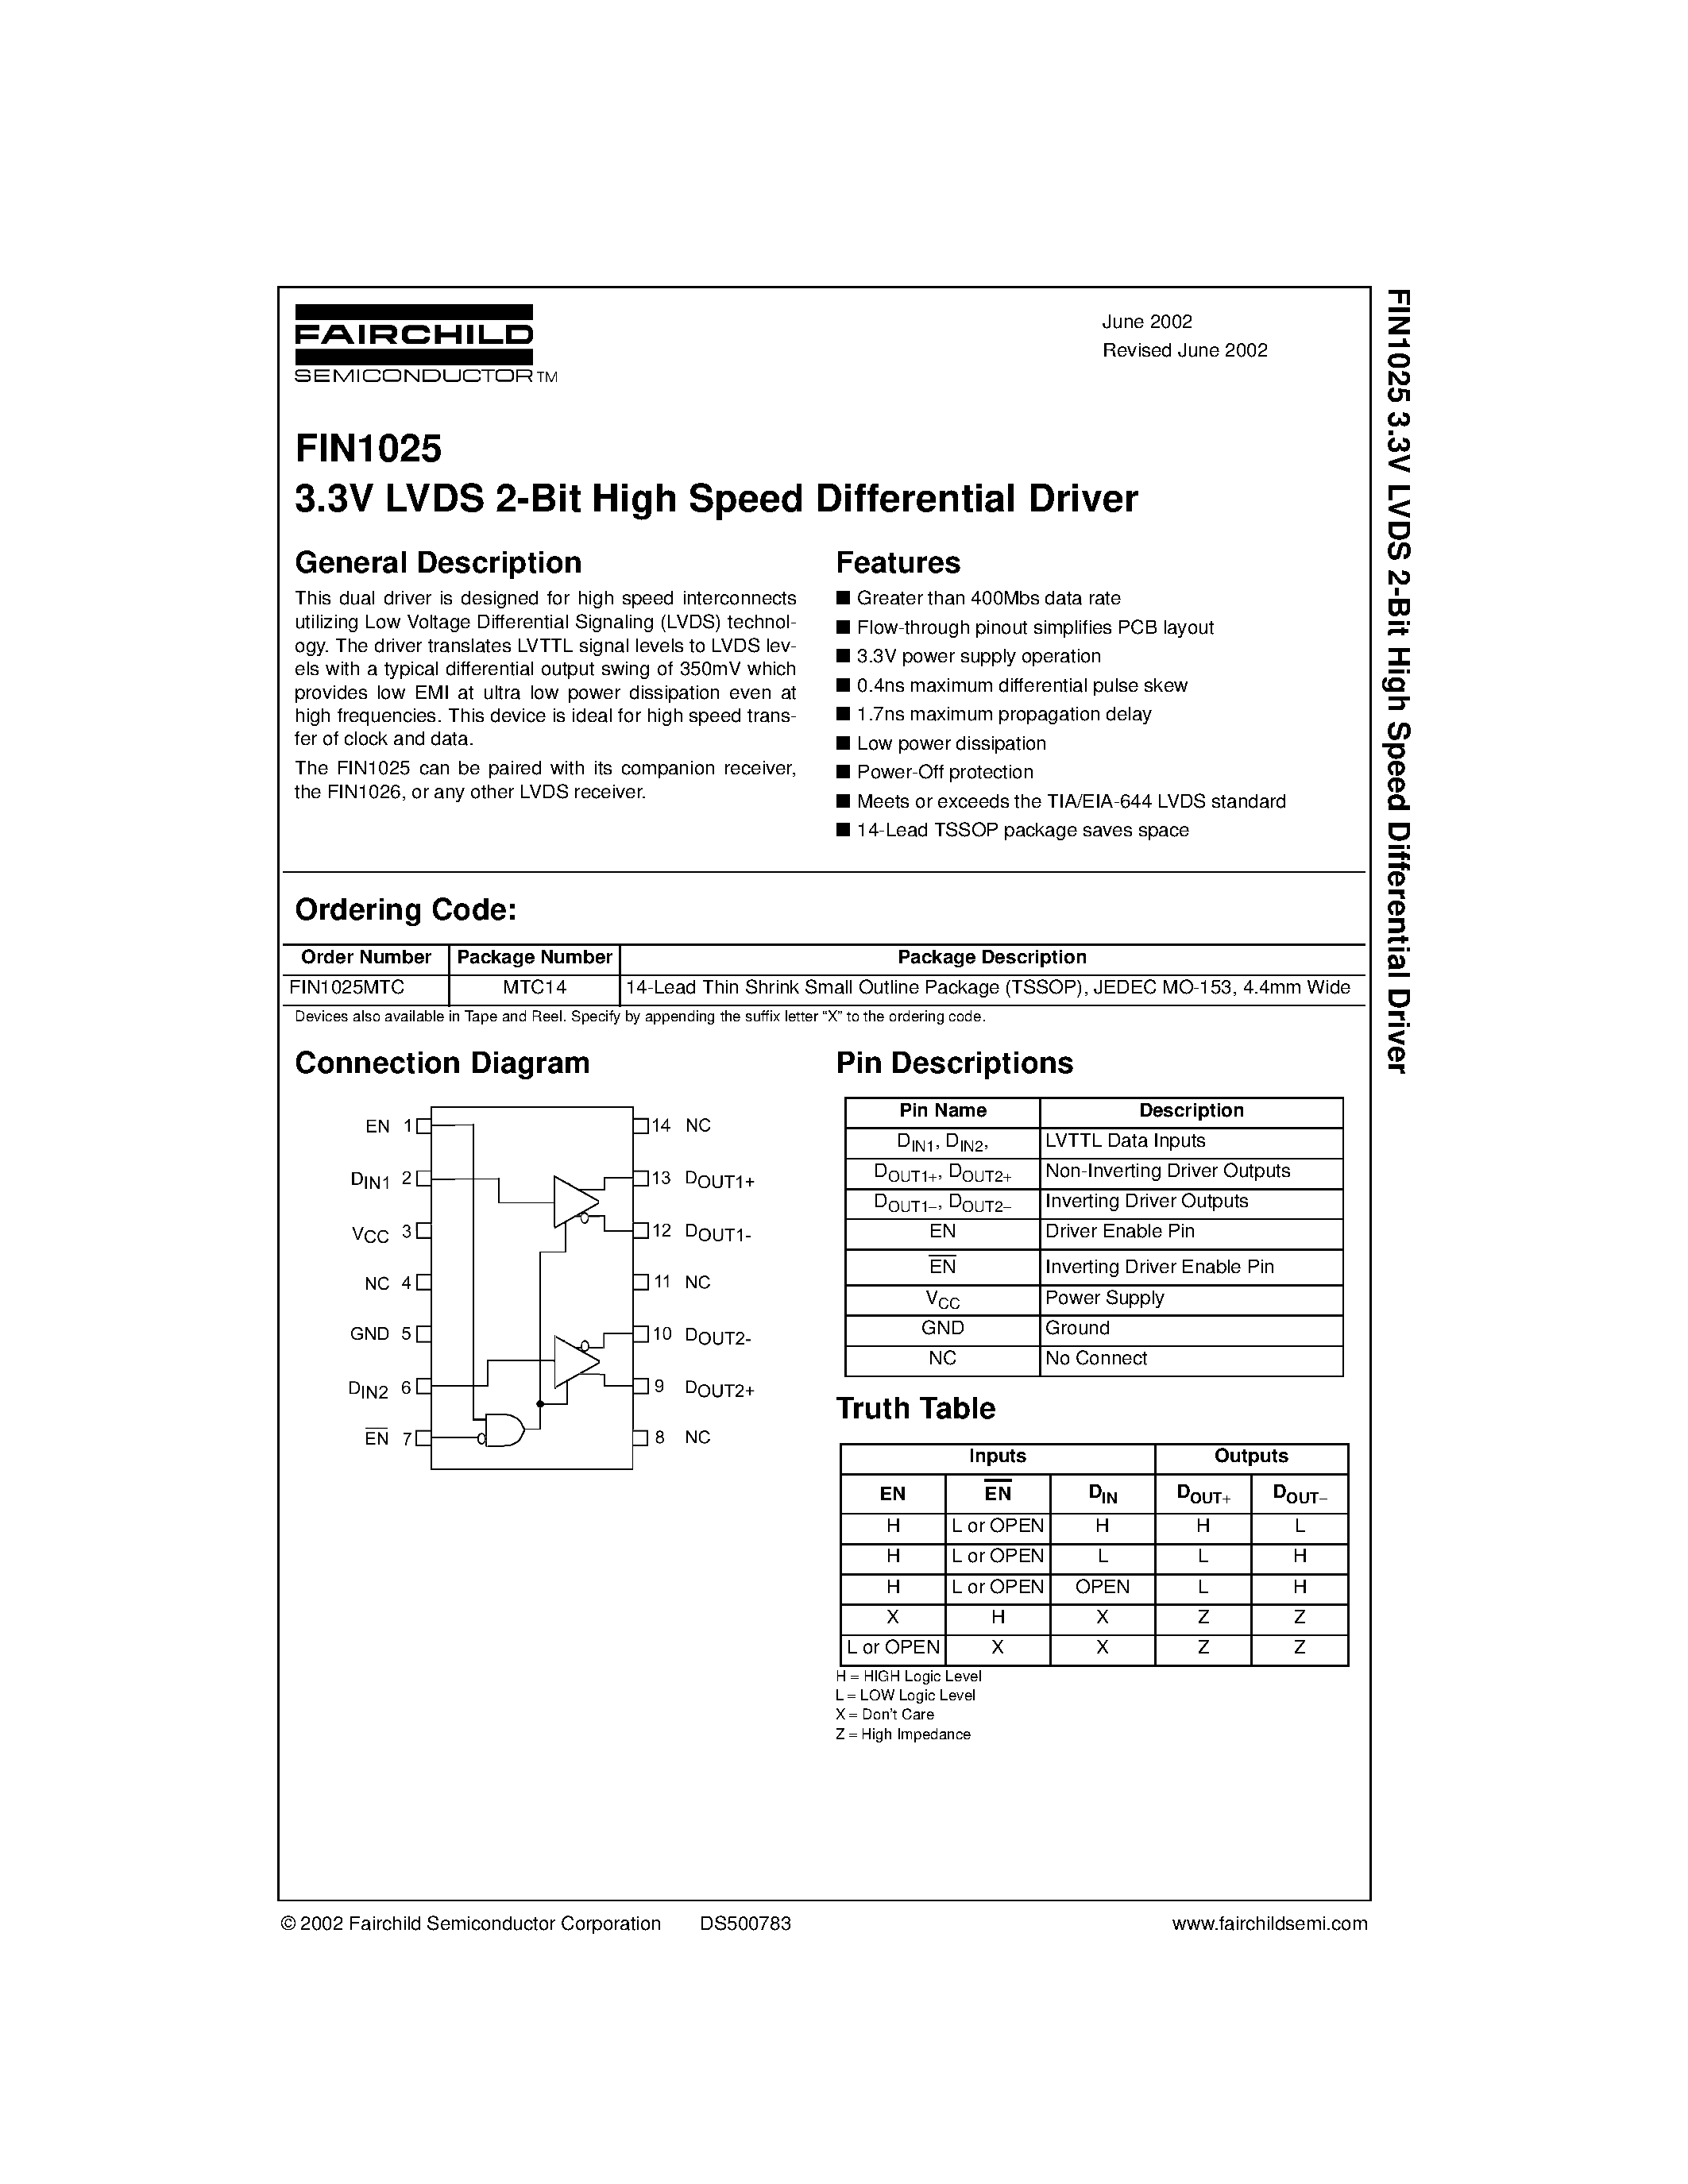 Datasheet FIN1025 - 3.3V LVDS 2-Bit High Speed Differential Driver page 1